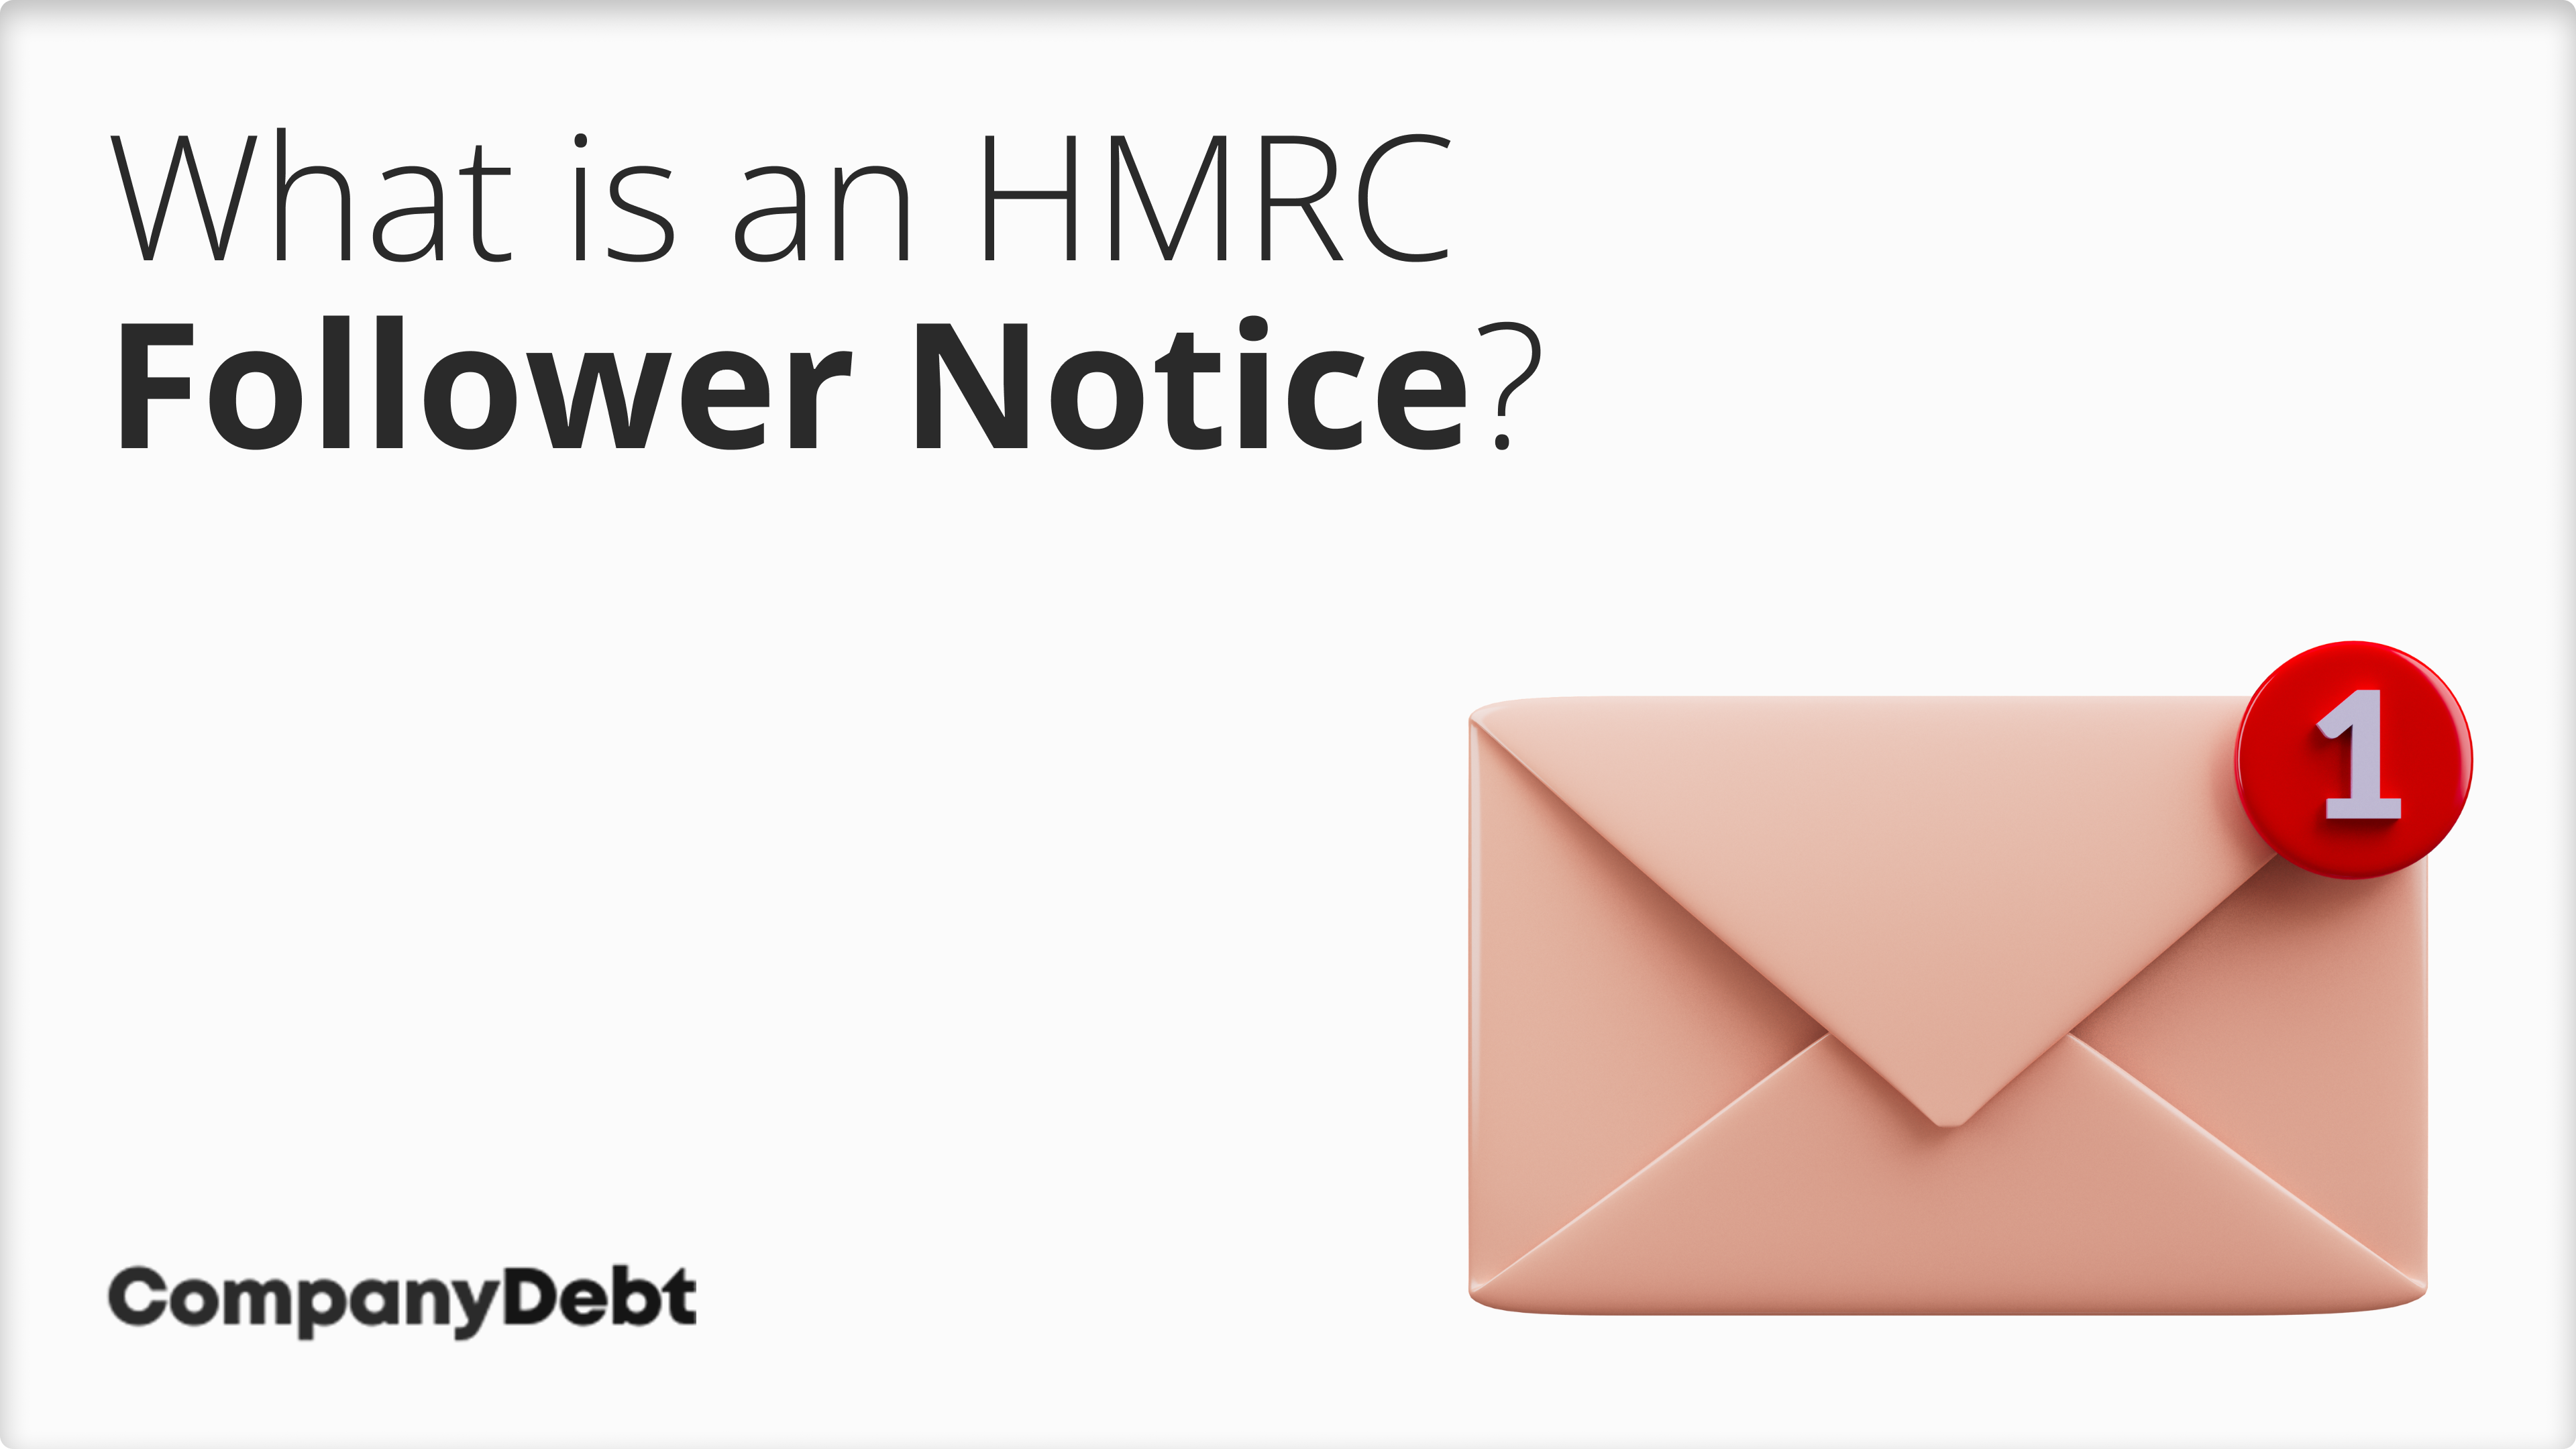 What is an HMRC Follower Notice?